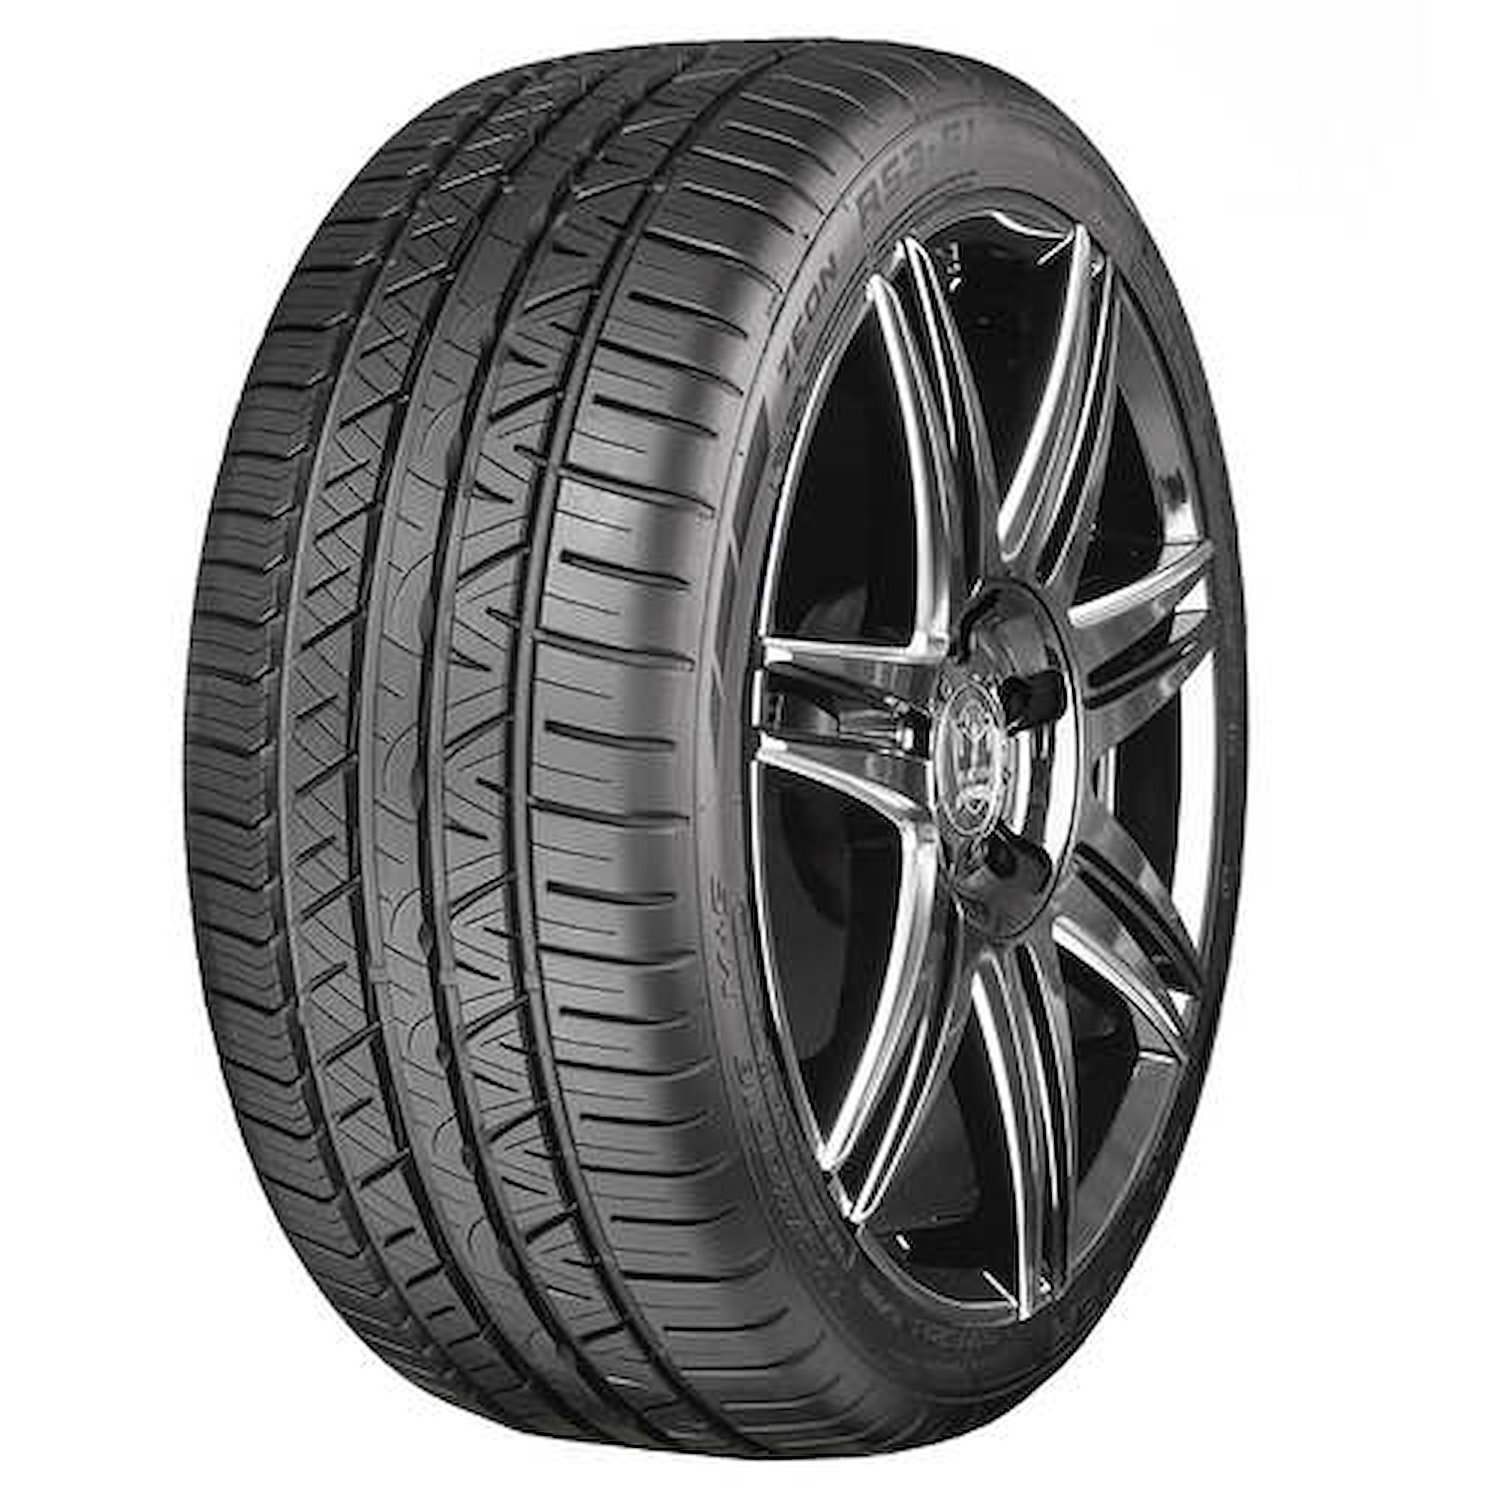 Zeon RS3-G1 High-Performance Tire, 205/50R17